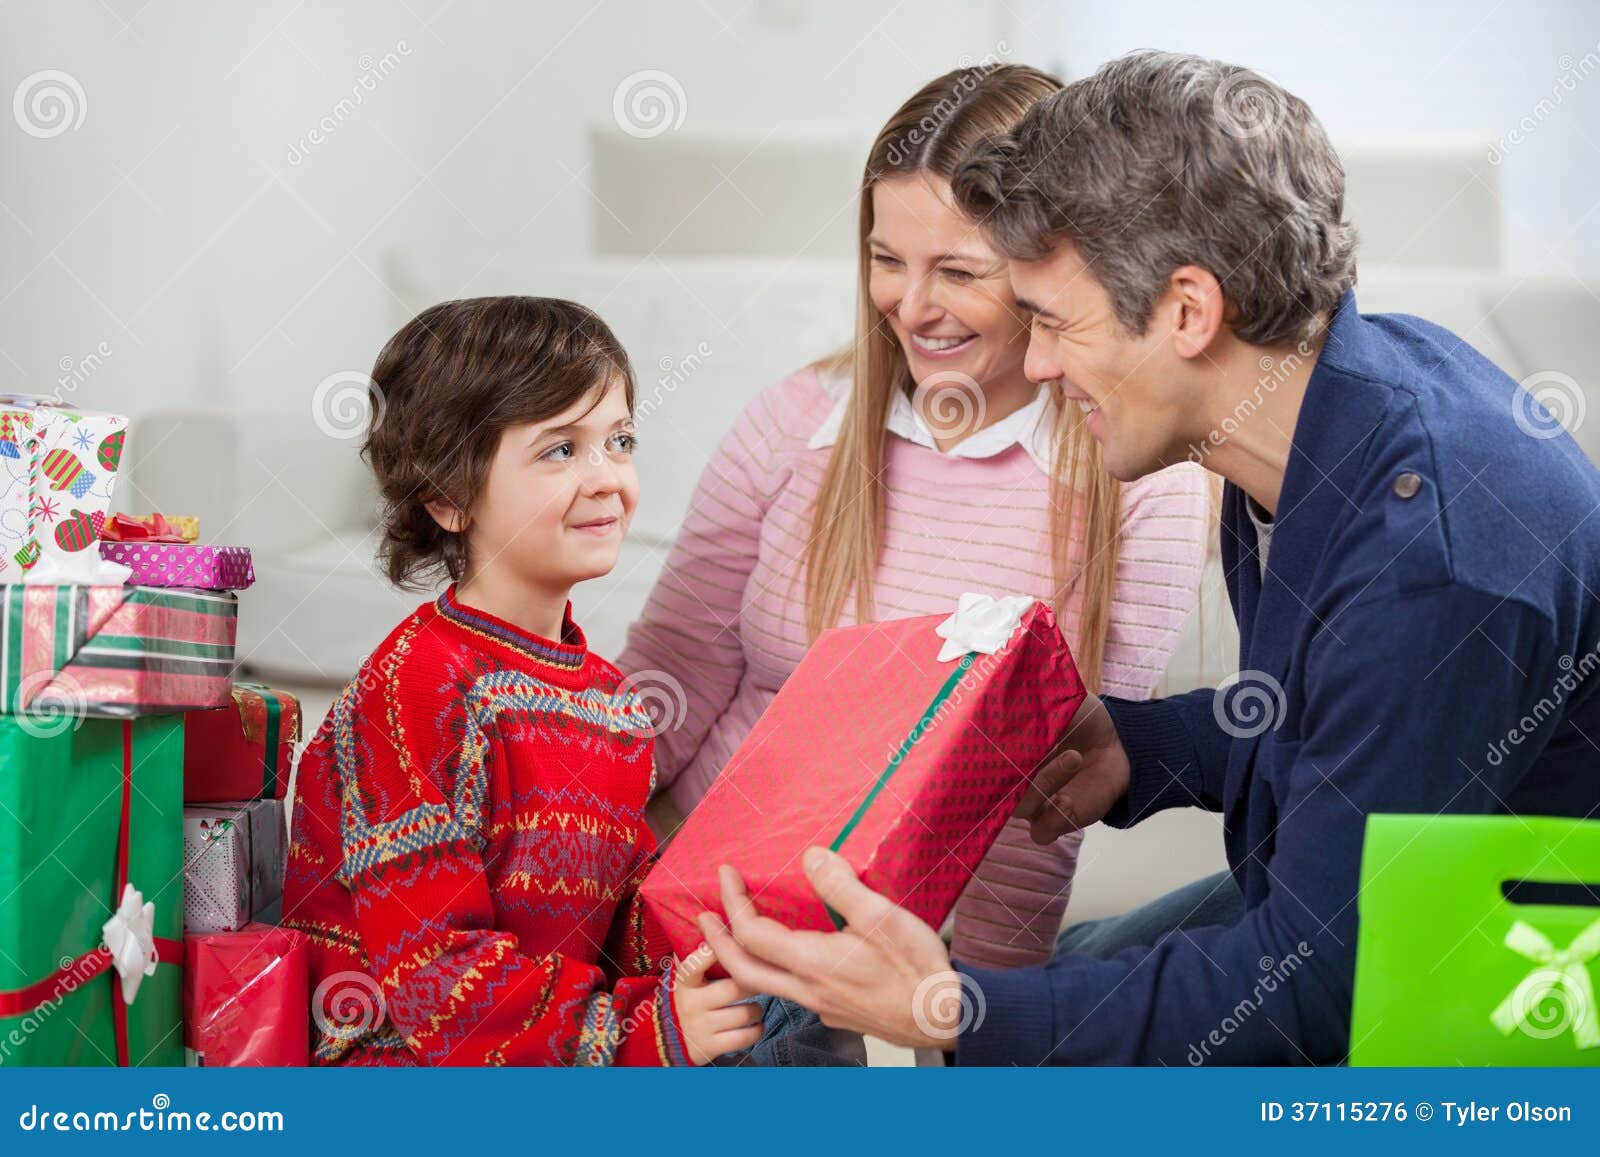 Father Giving Christmas T To Son Royalty Free Stock Image Image 37115276